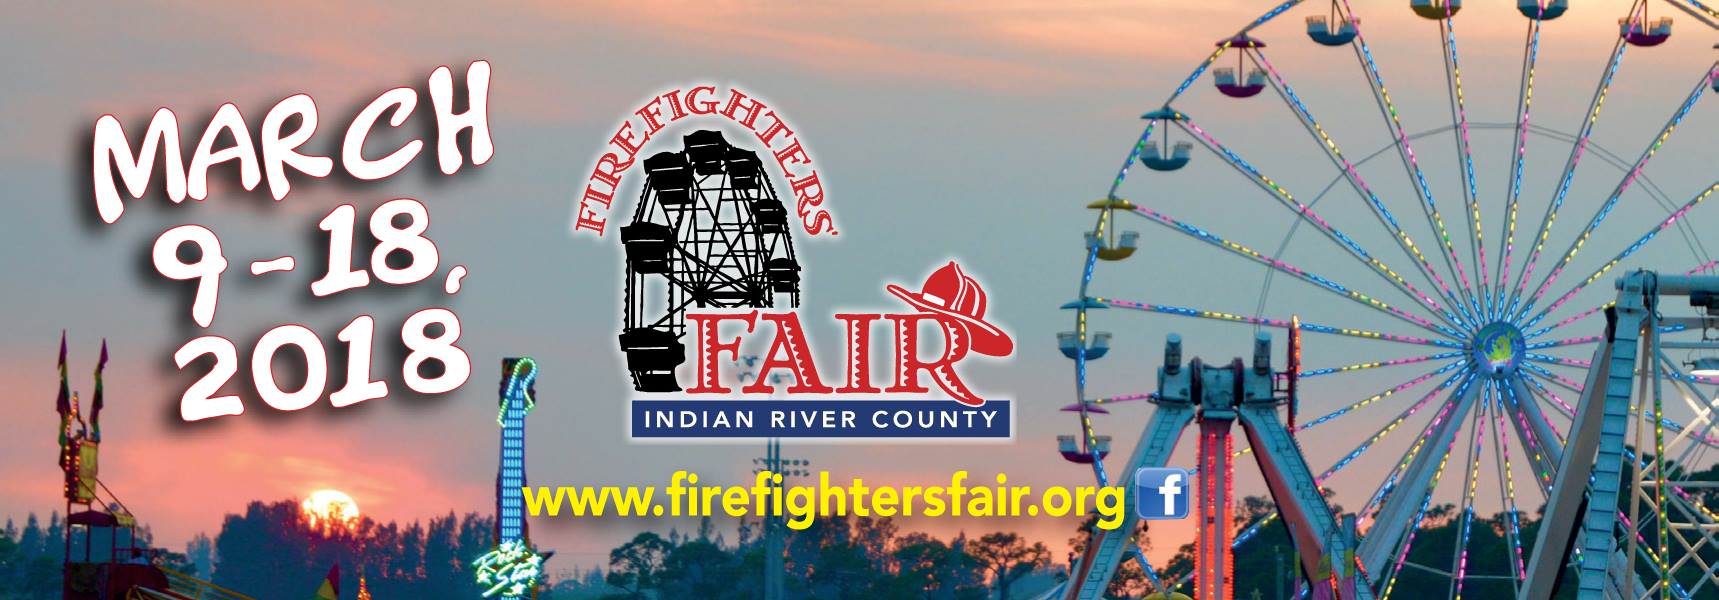 Firefighters’ Indian River County Fair